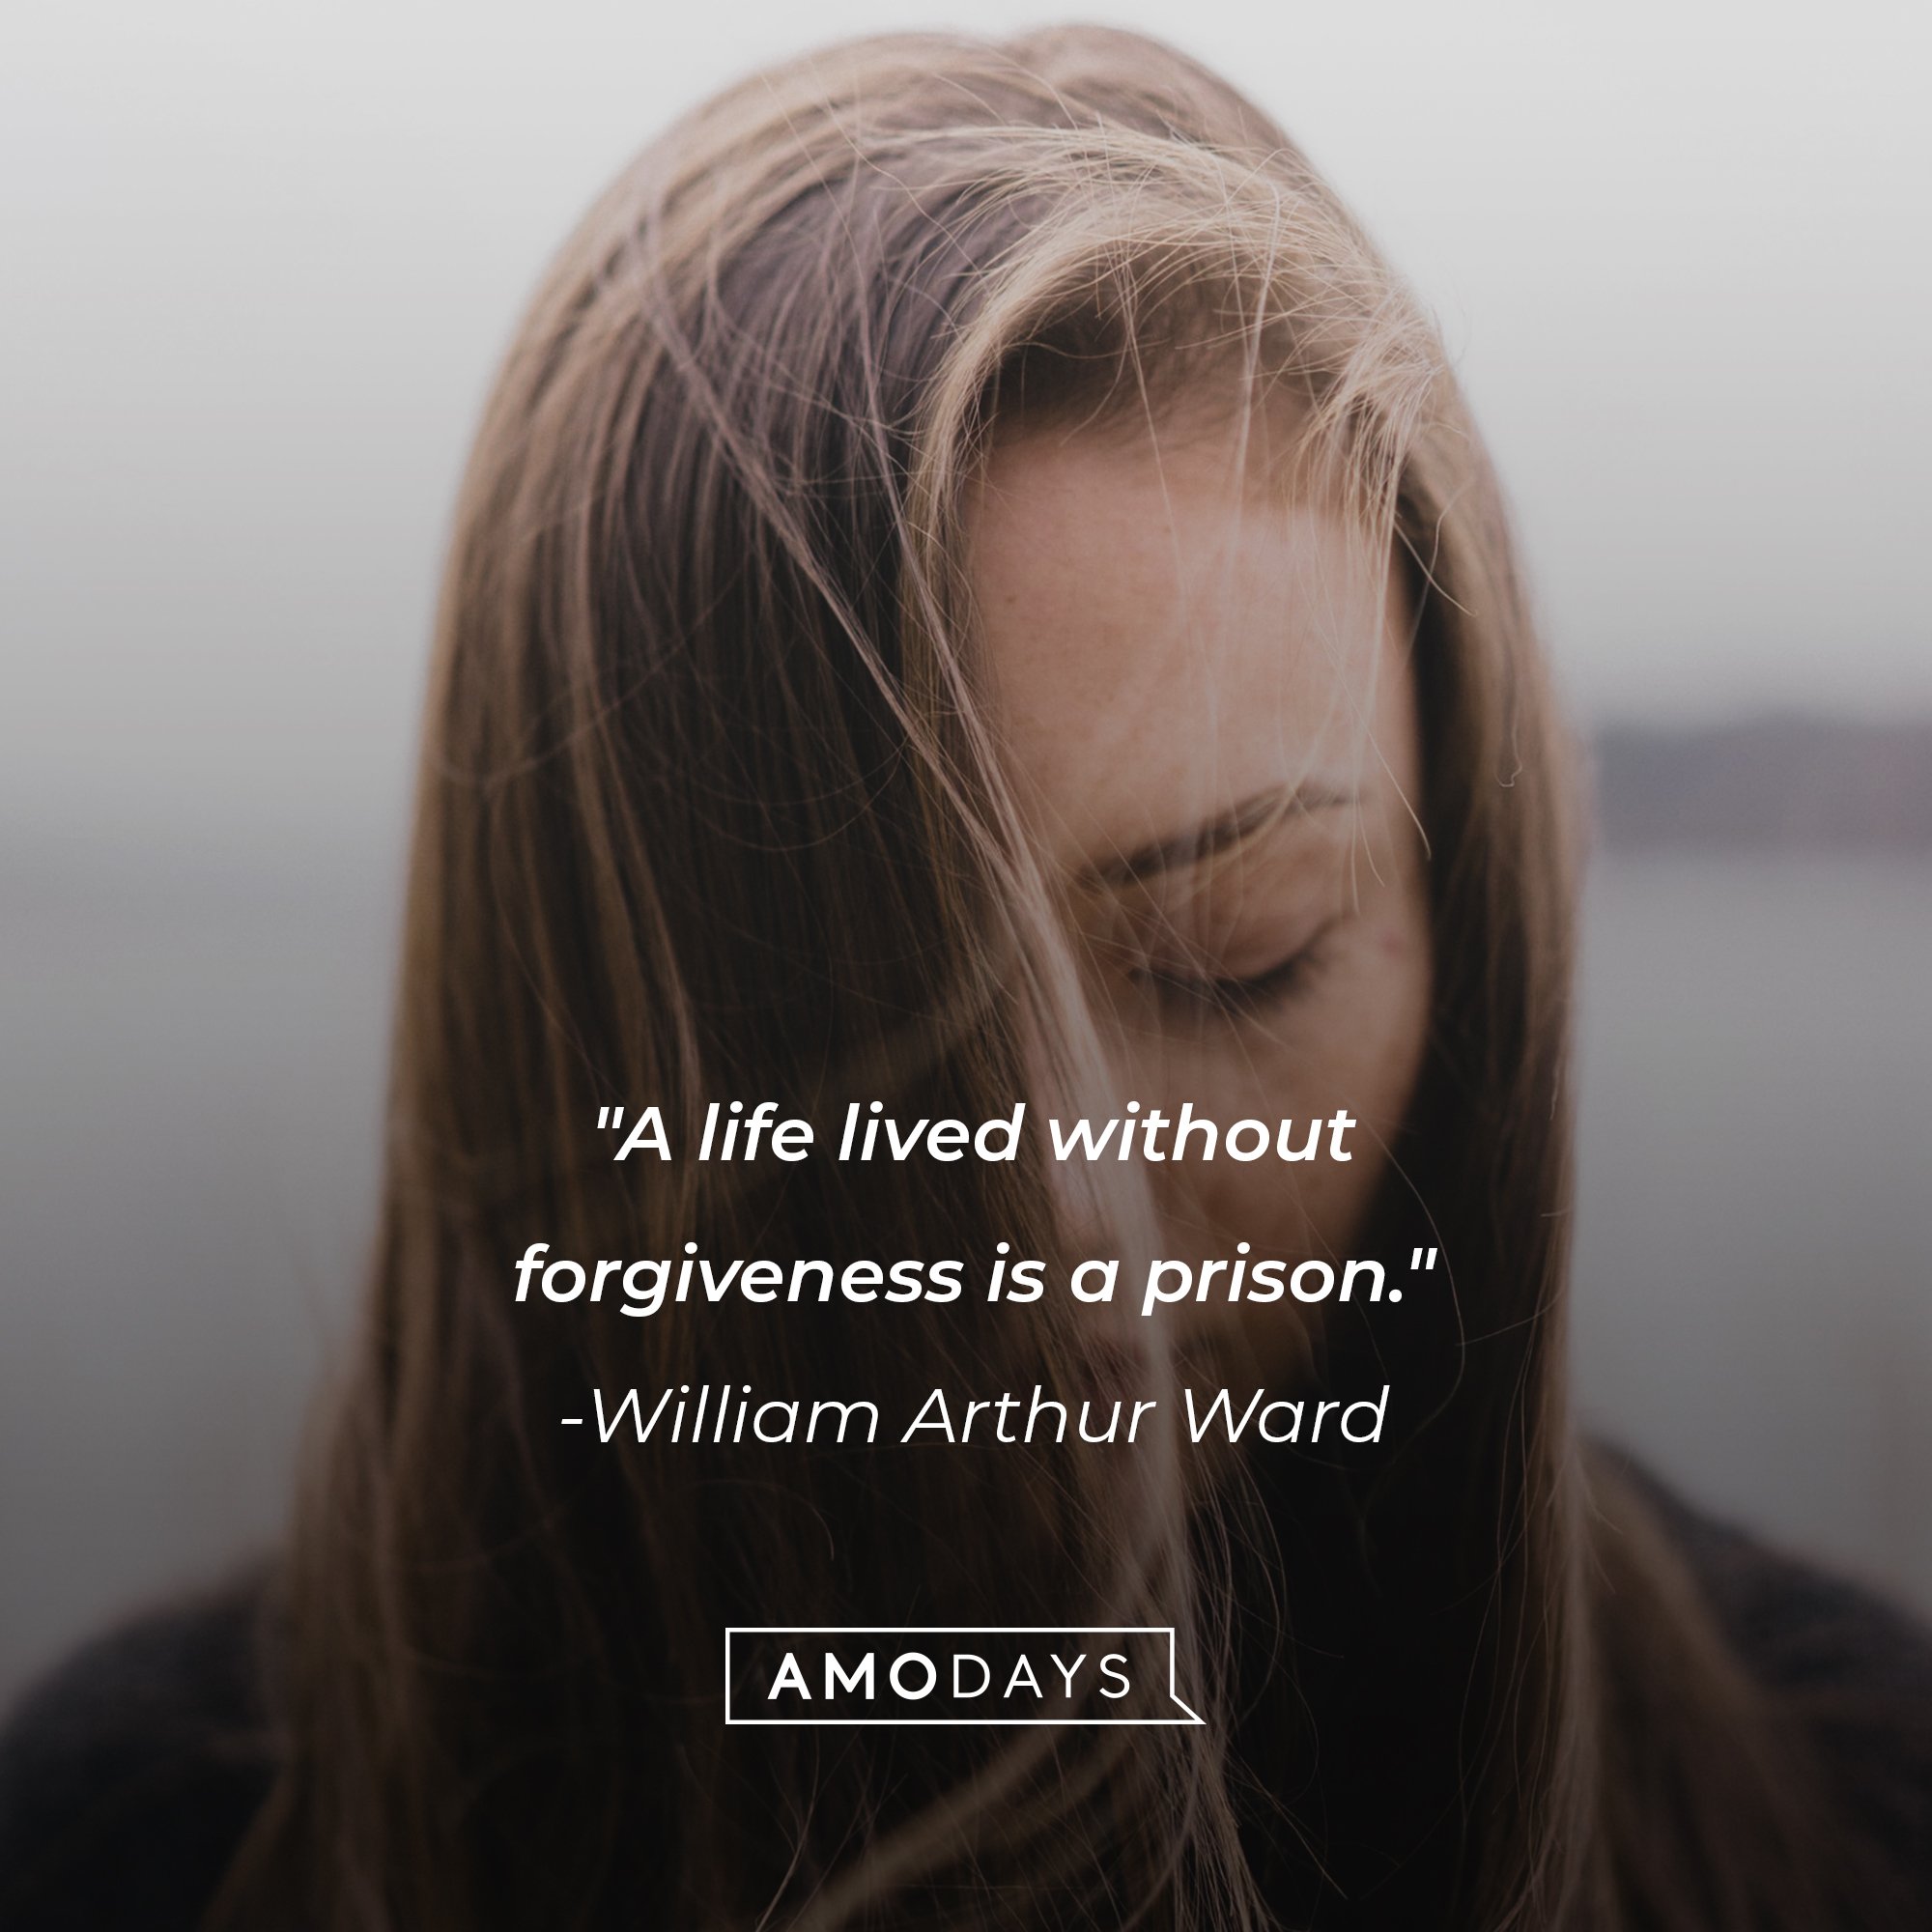 William Arthur Ward’s quote: "A life lived without forgiveness is a prison." | Image: AmoDays     